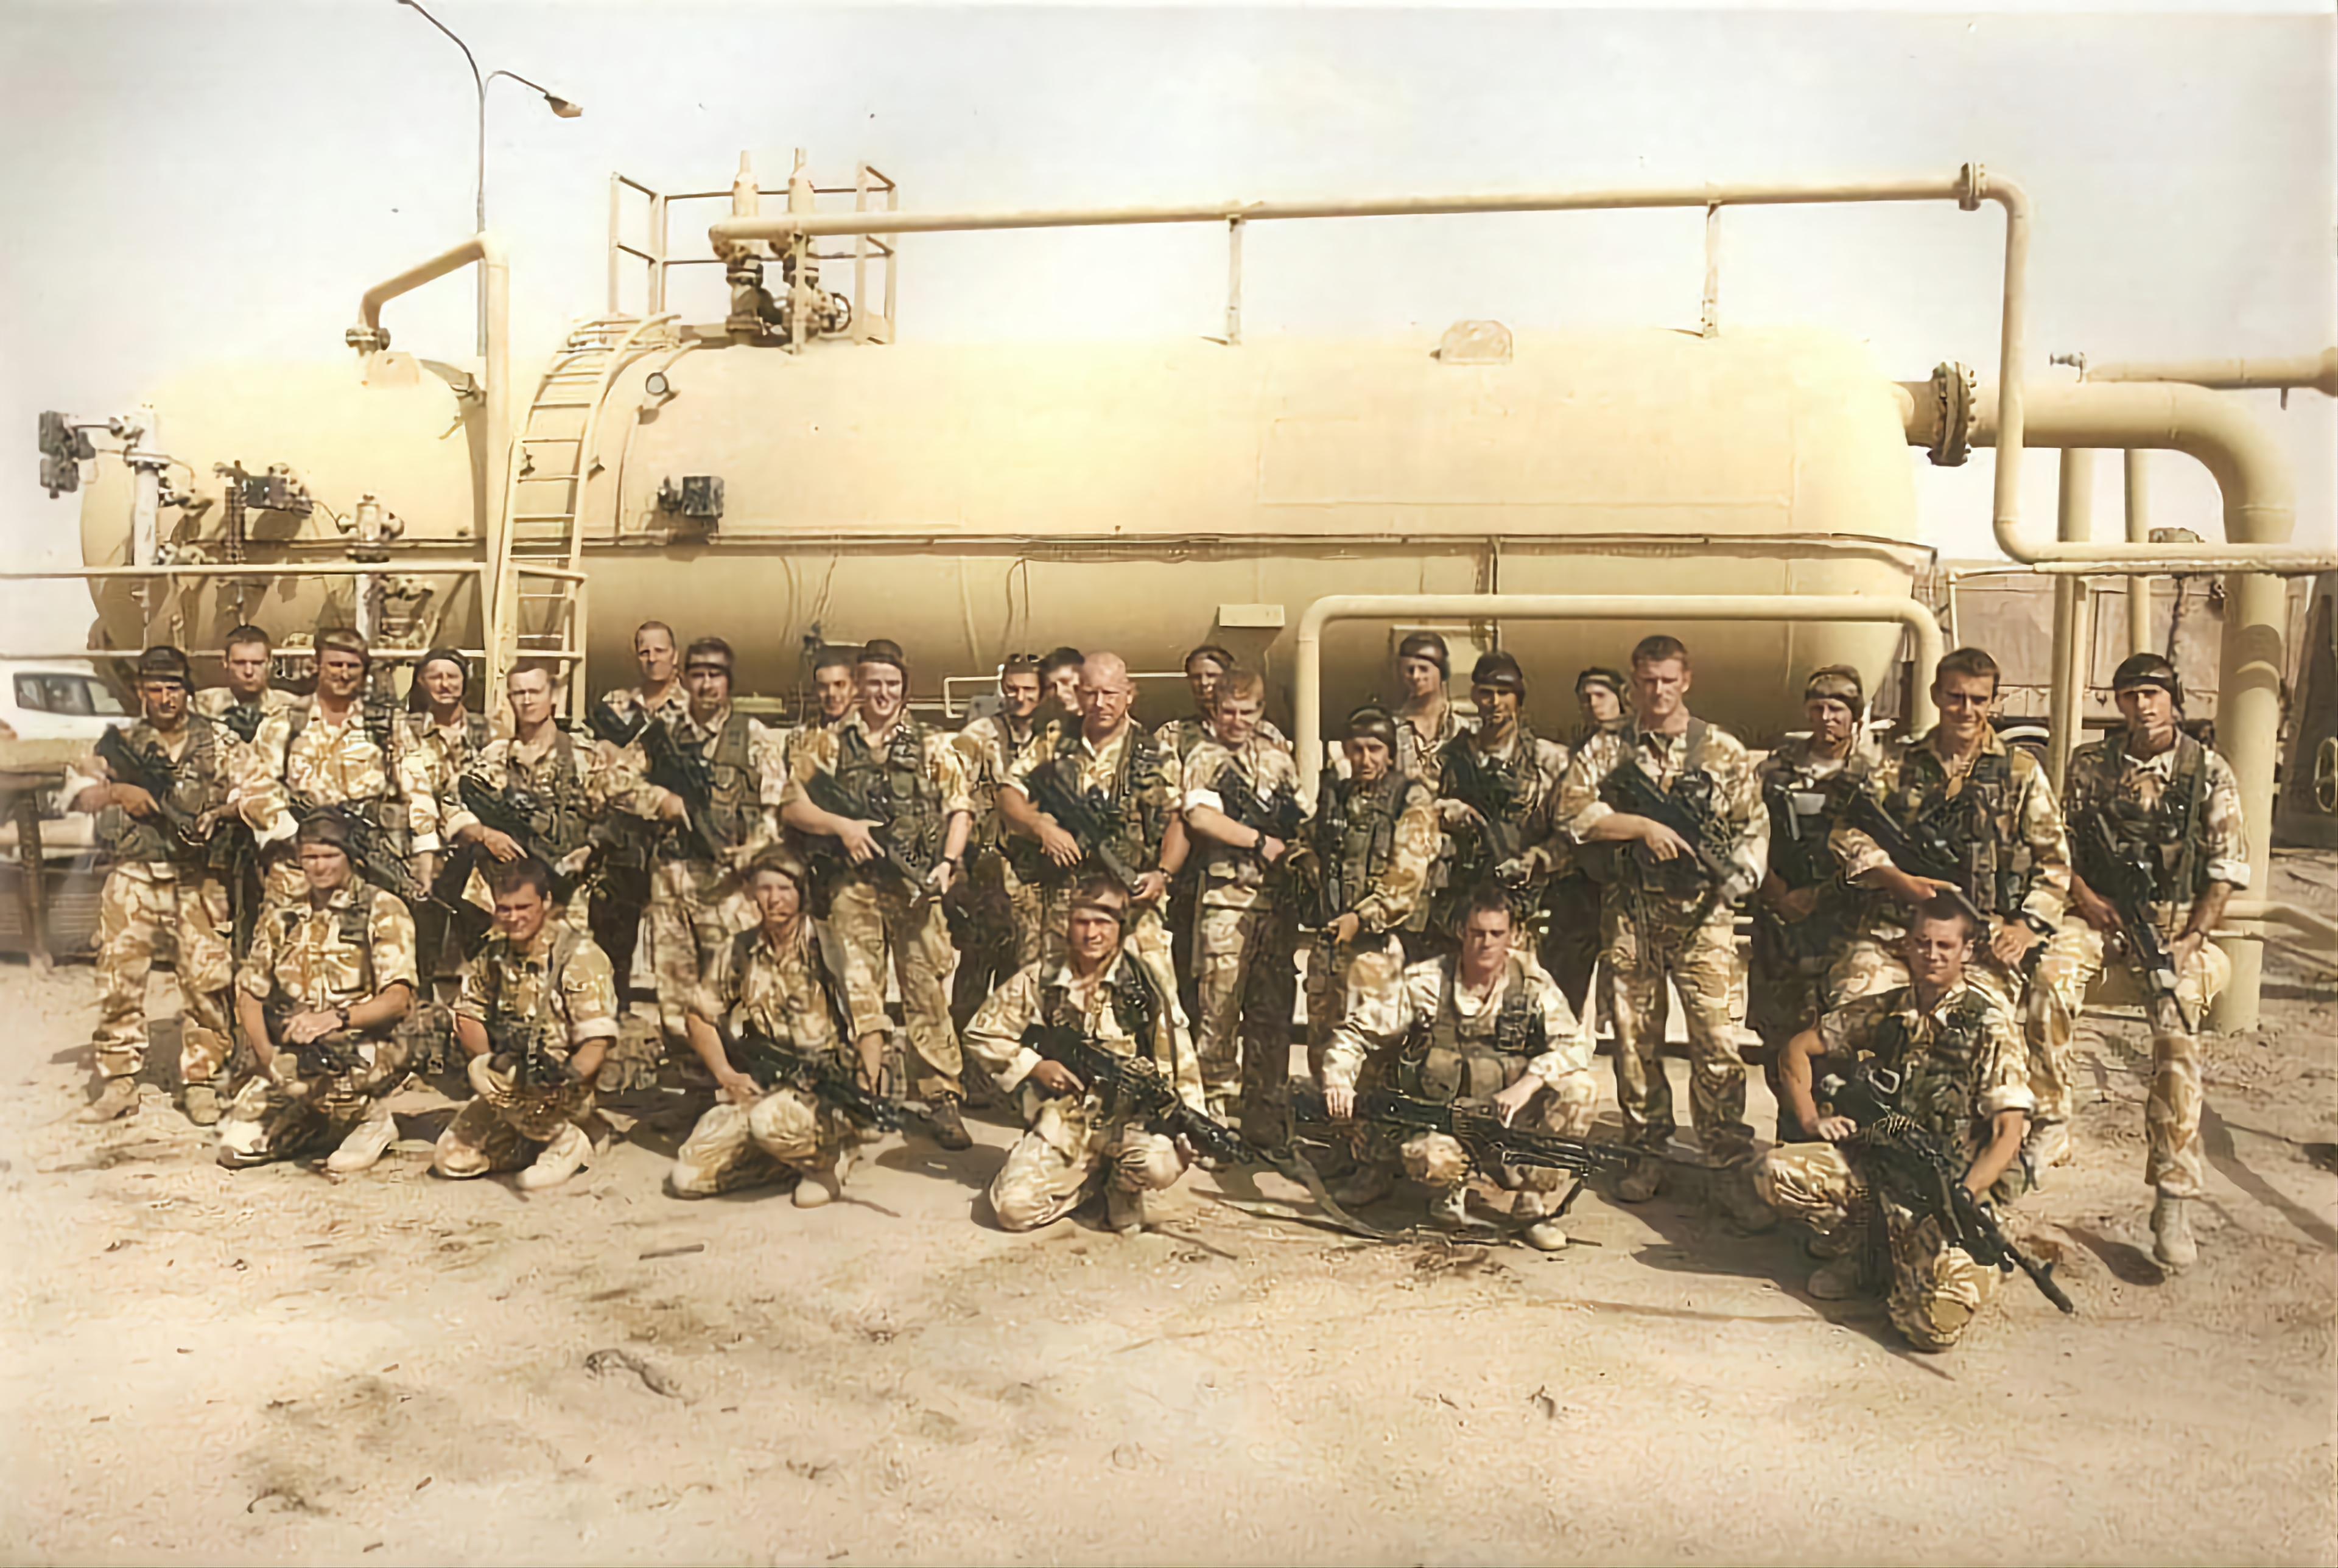 Image shows RAF personnel with rifles and wearing camouflage in Iraq. 